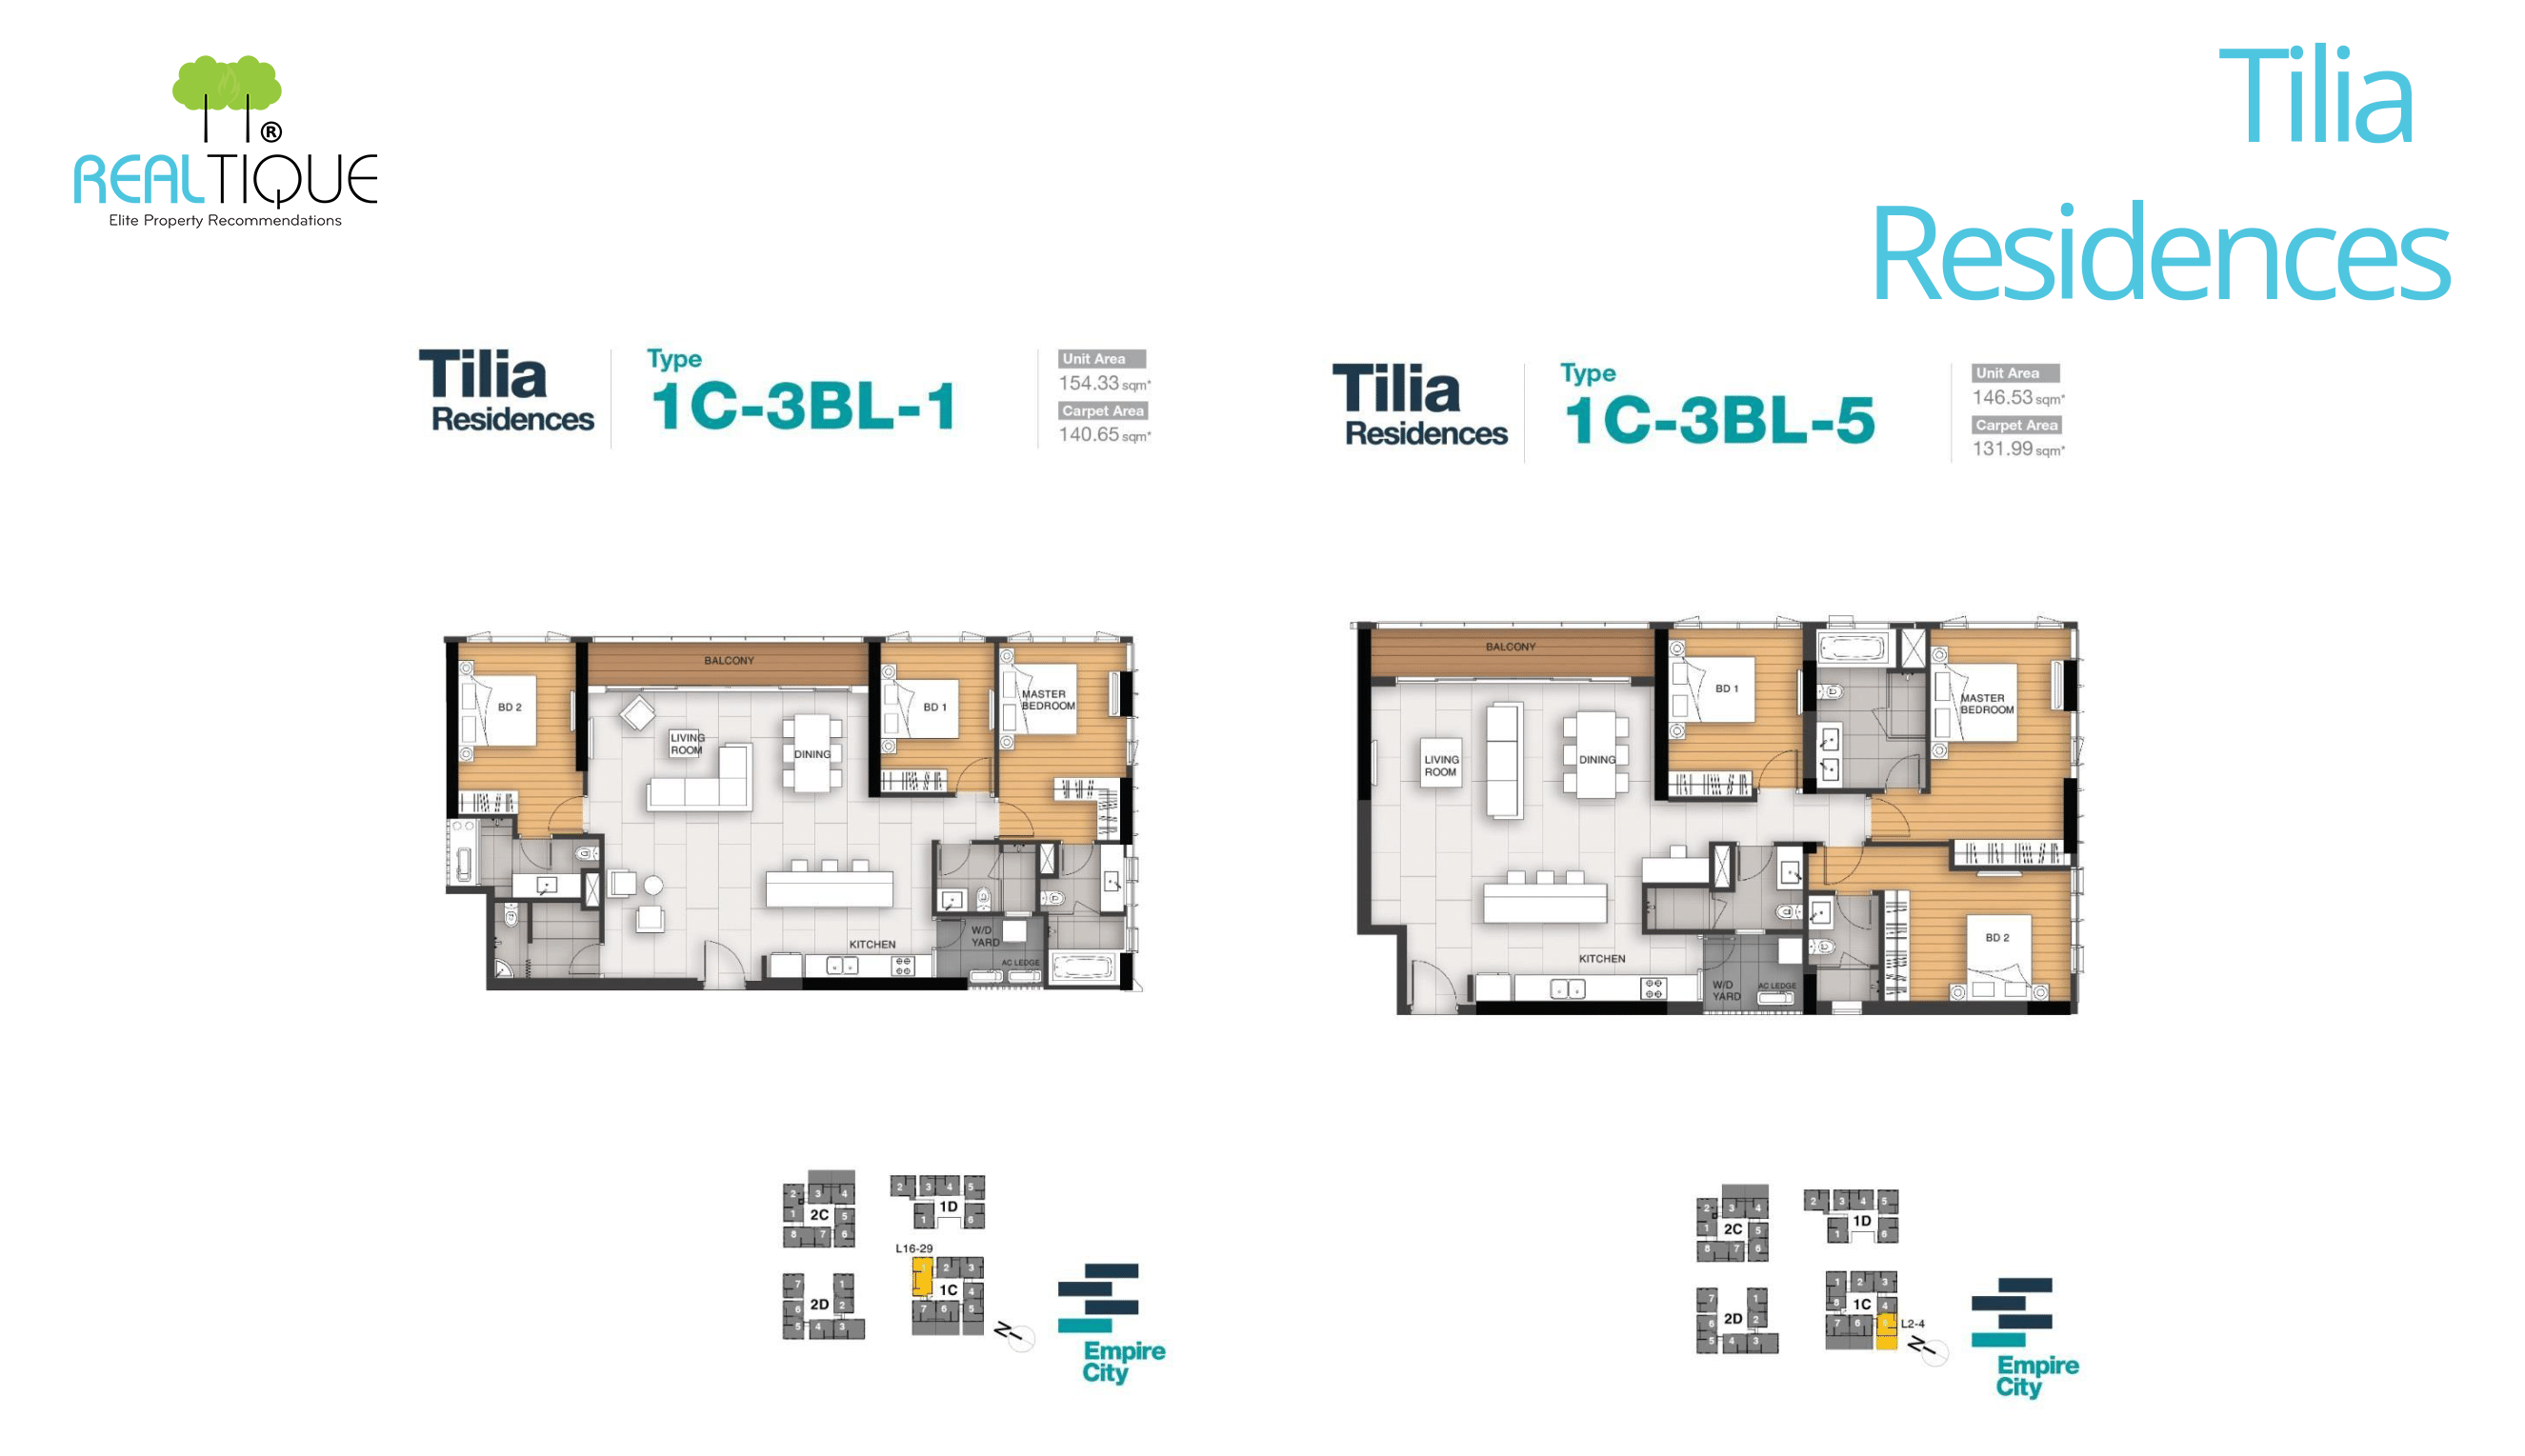 Detailed Layouts of T1C Tower of Tilia Residences (MU7)